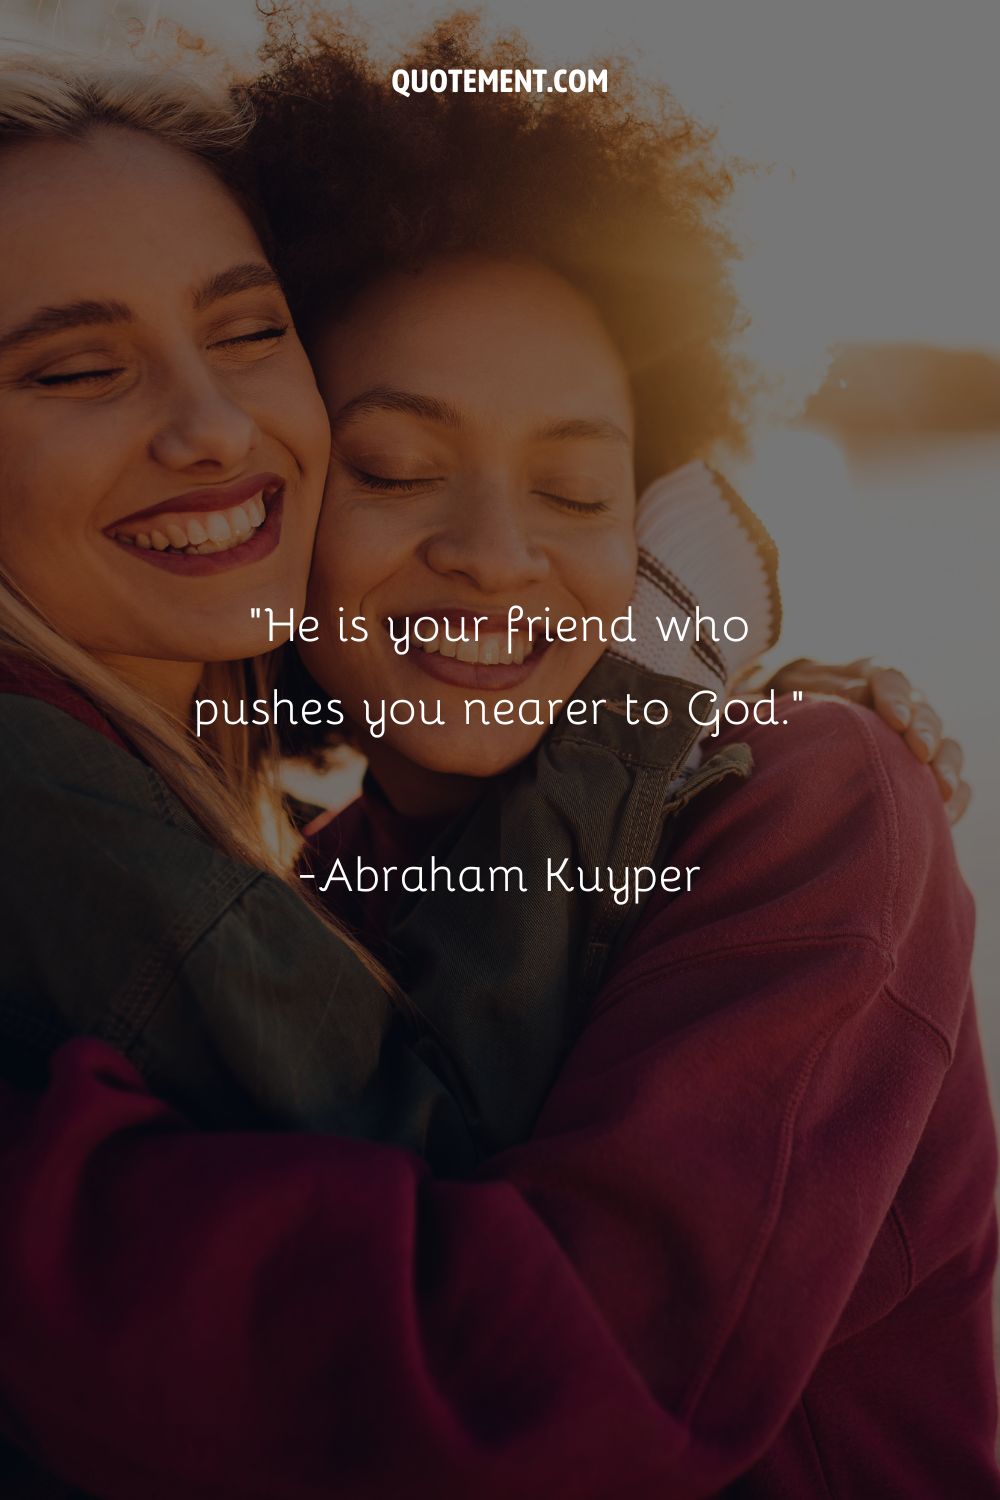 Two female friends smiling and embracing each other representing an inspiring Christian friendship quote
